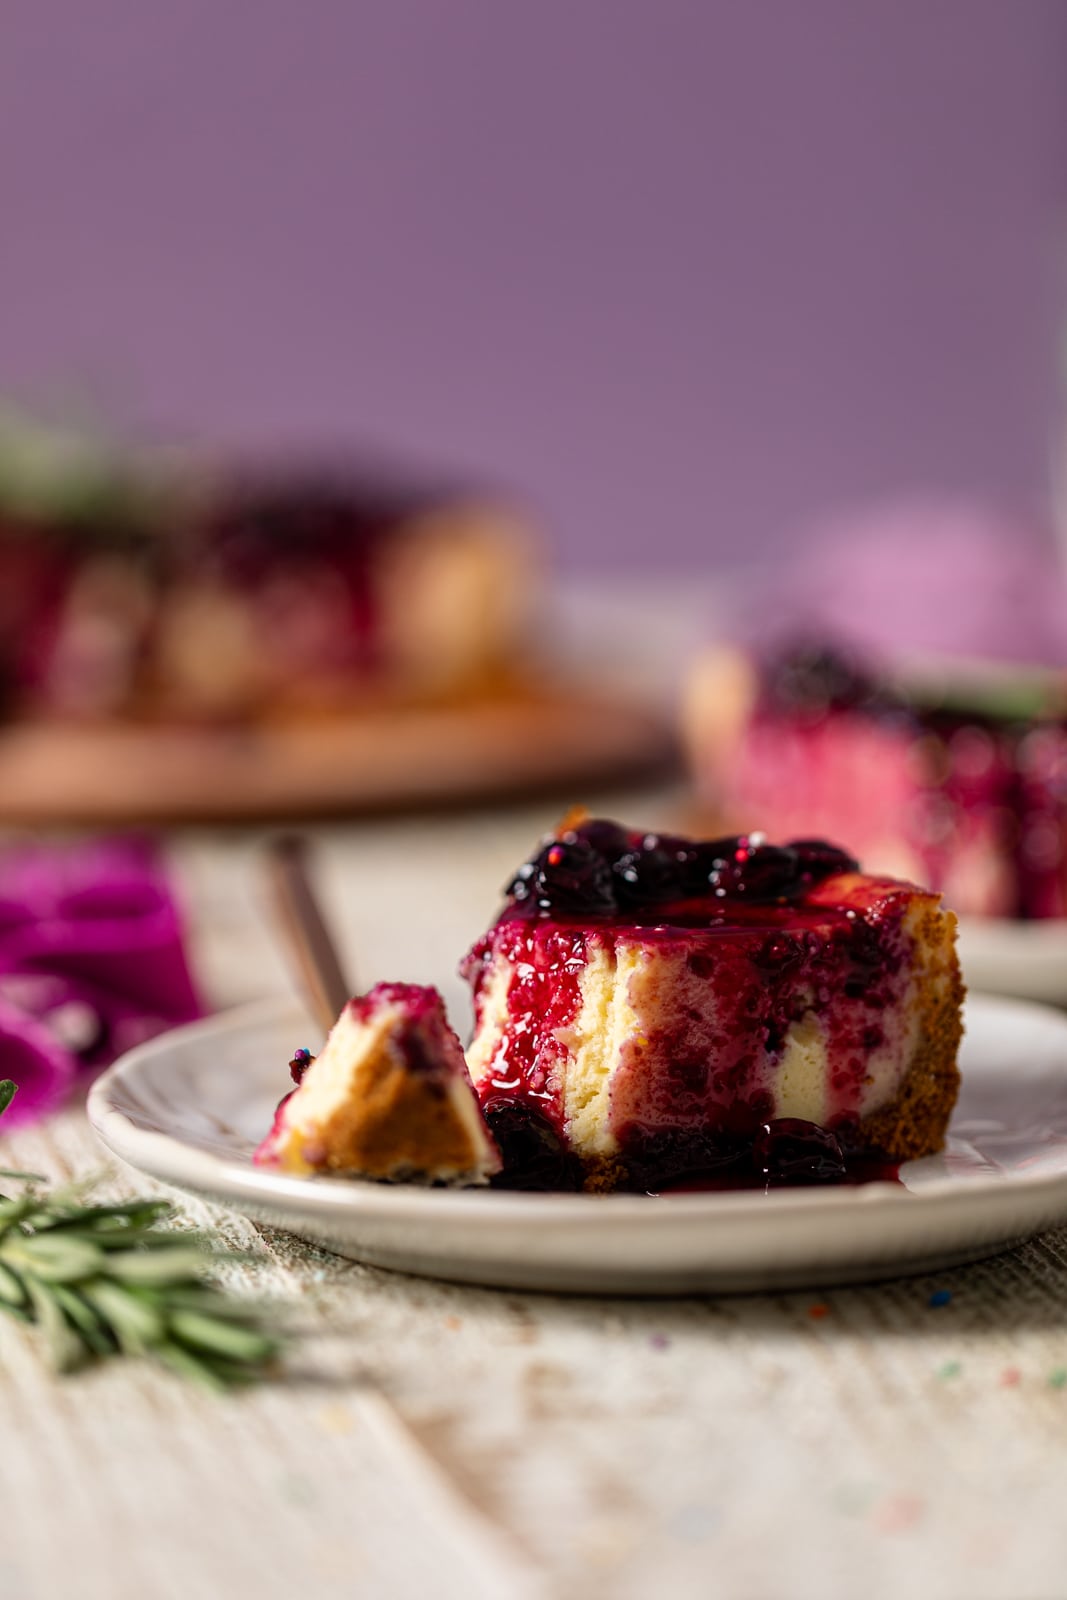 Slice of Lemon Blueberry Cheesecake on a plate